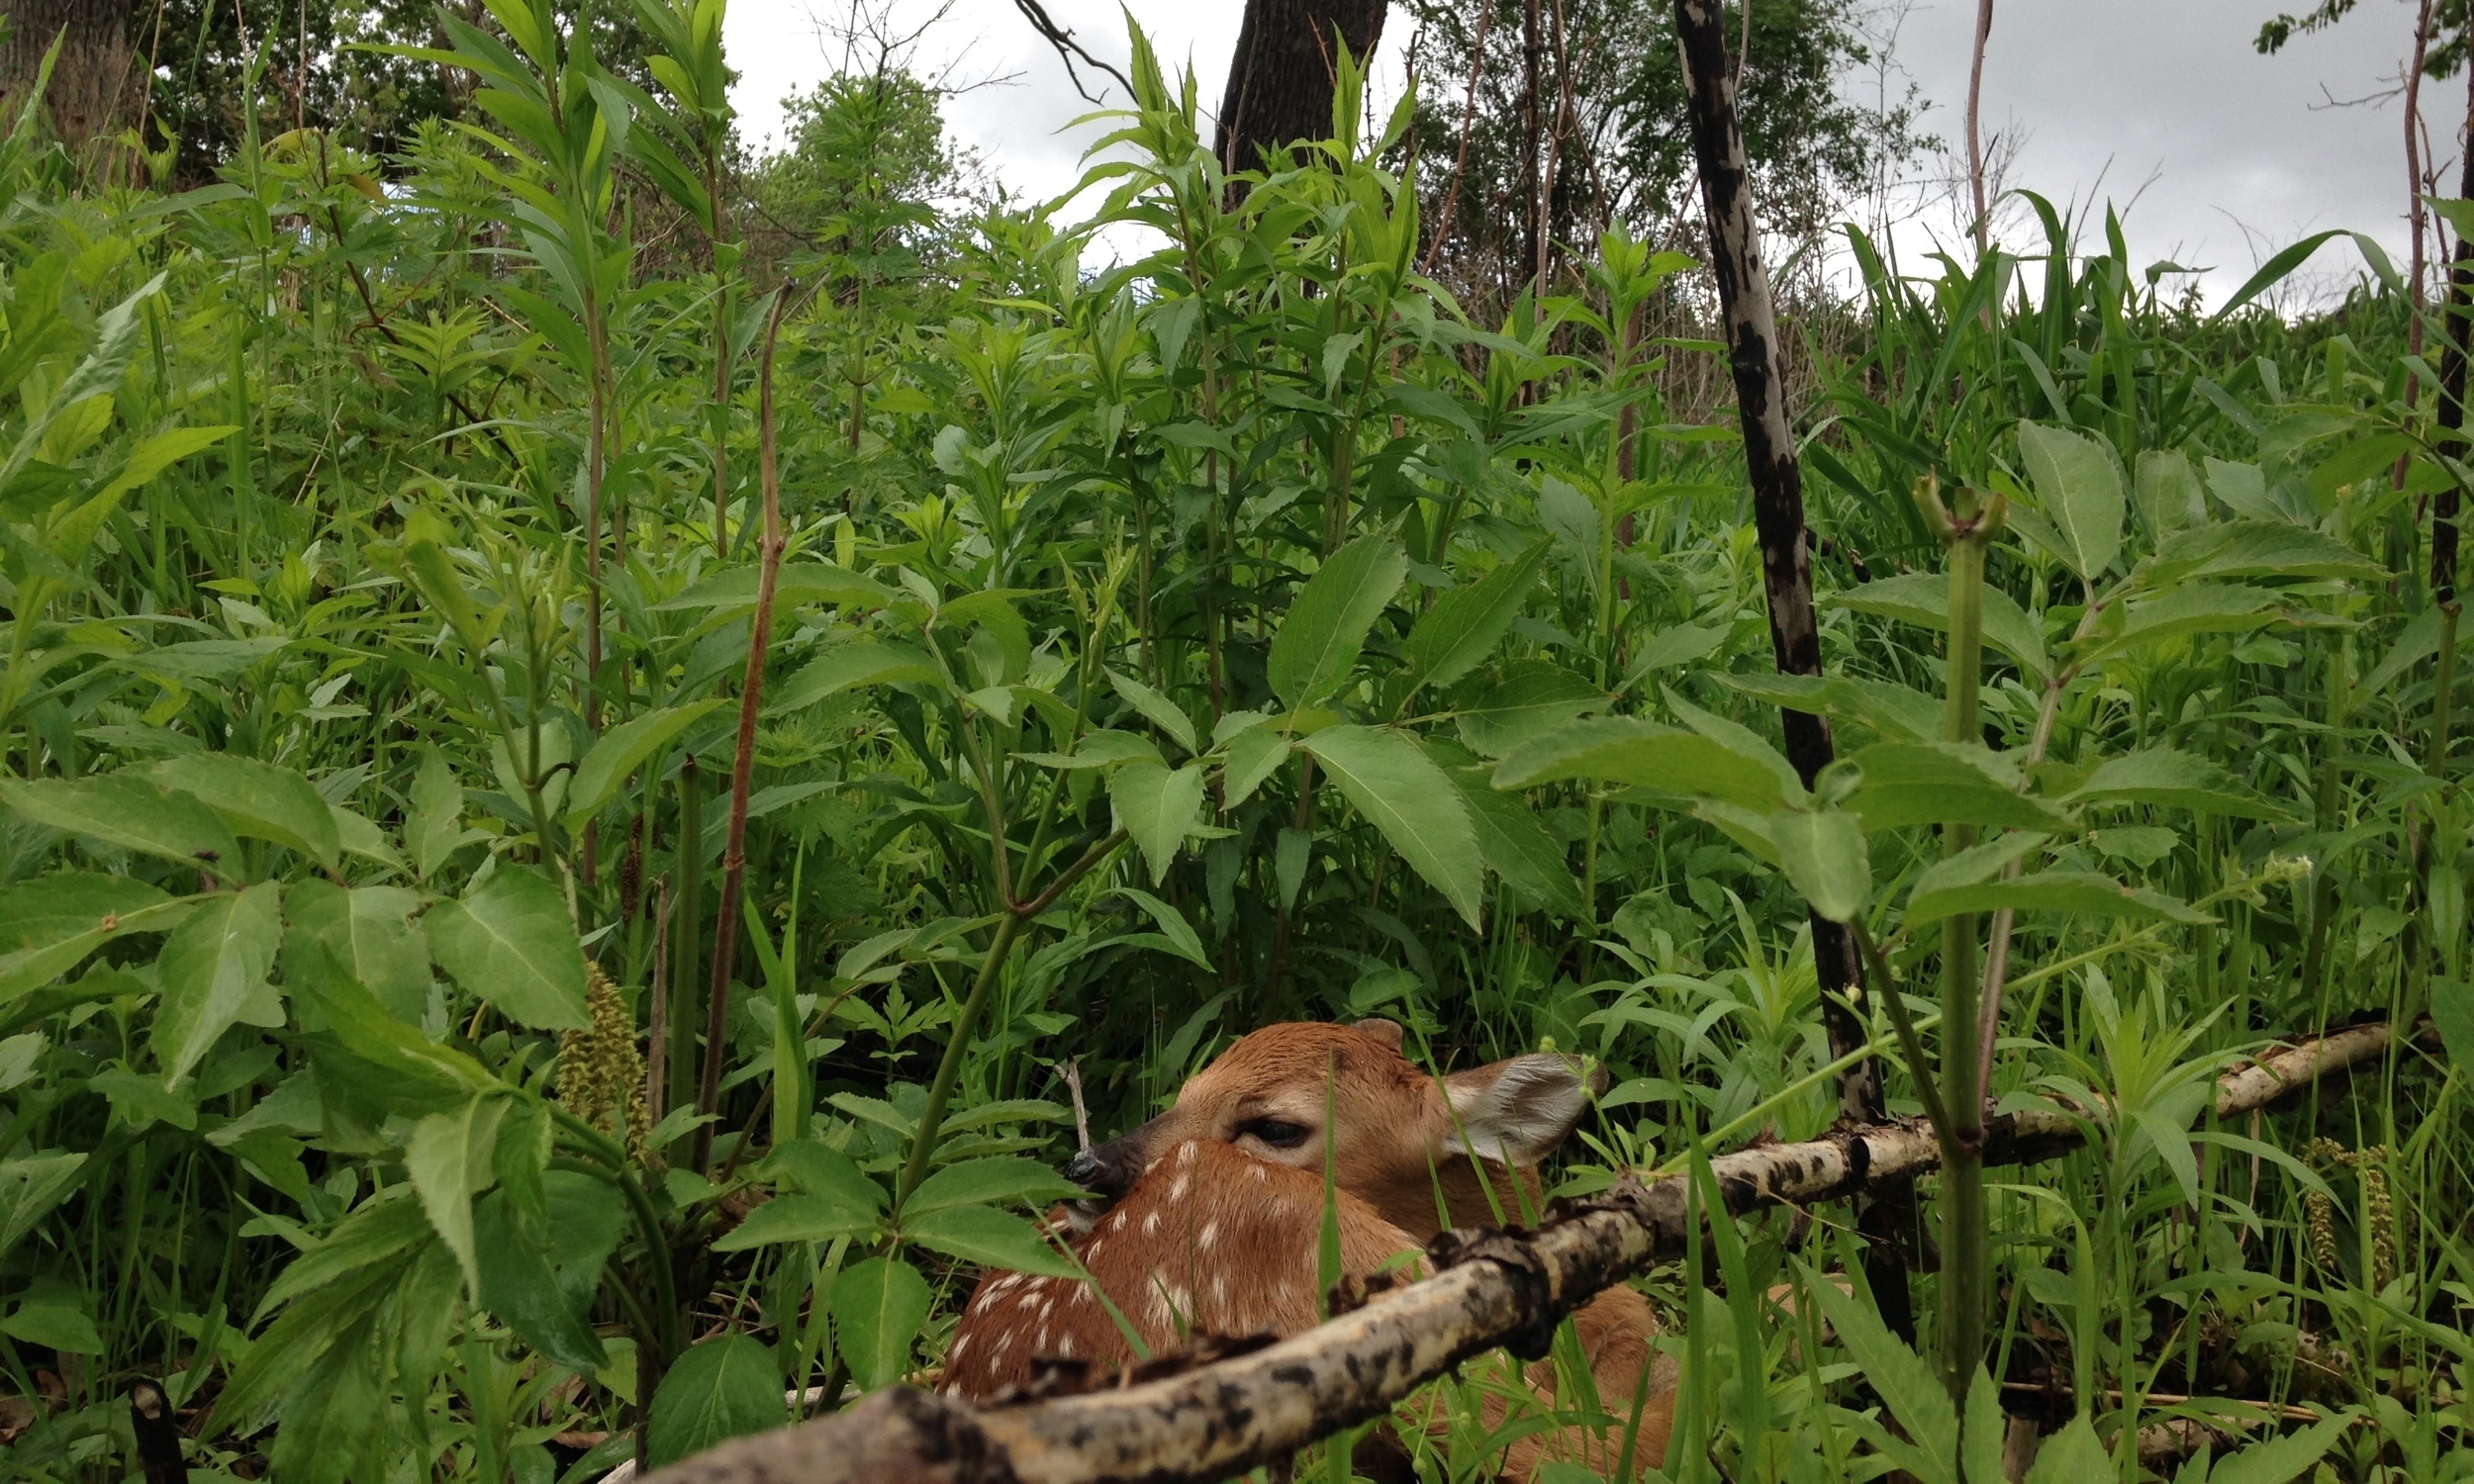 A whitetail fawn at rest in Faville Woods